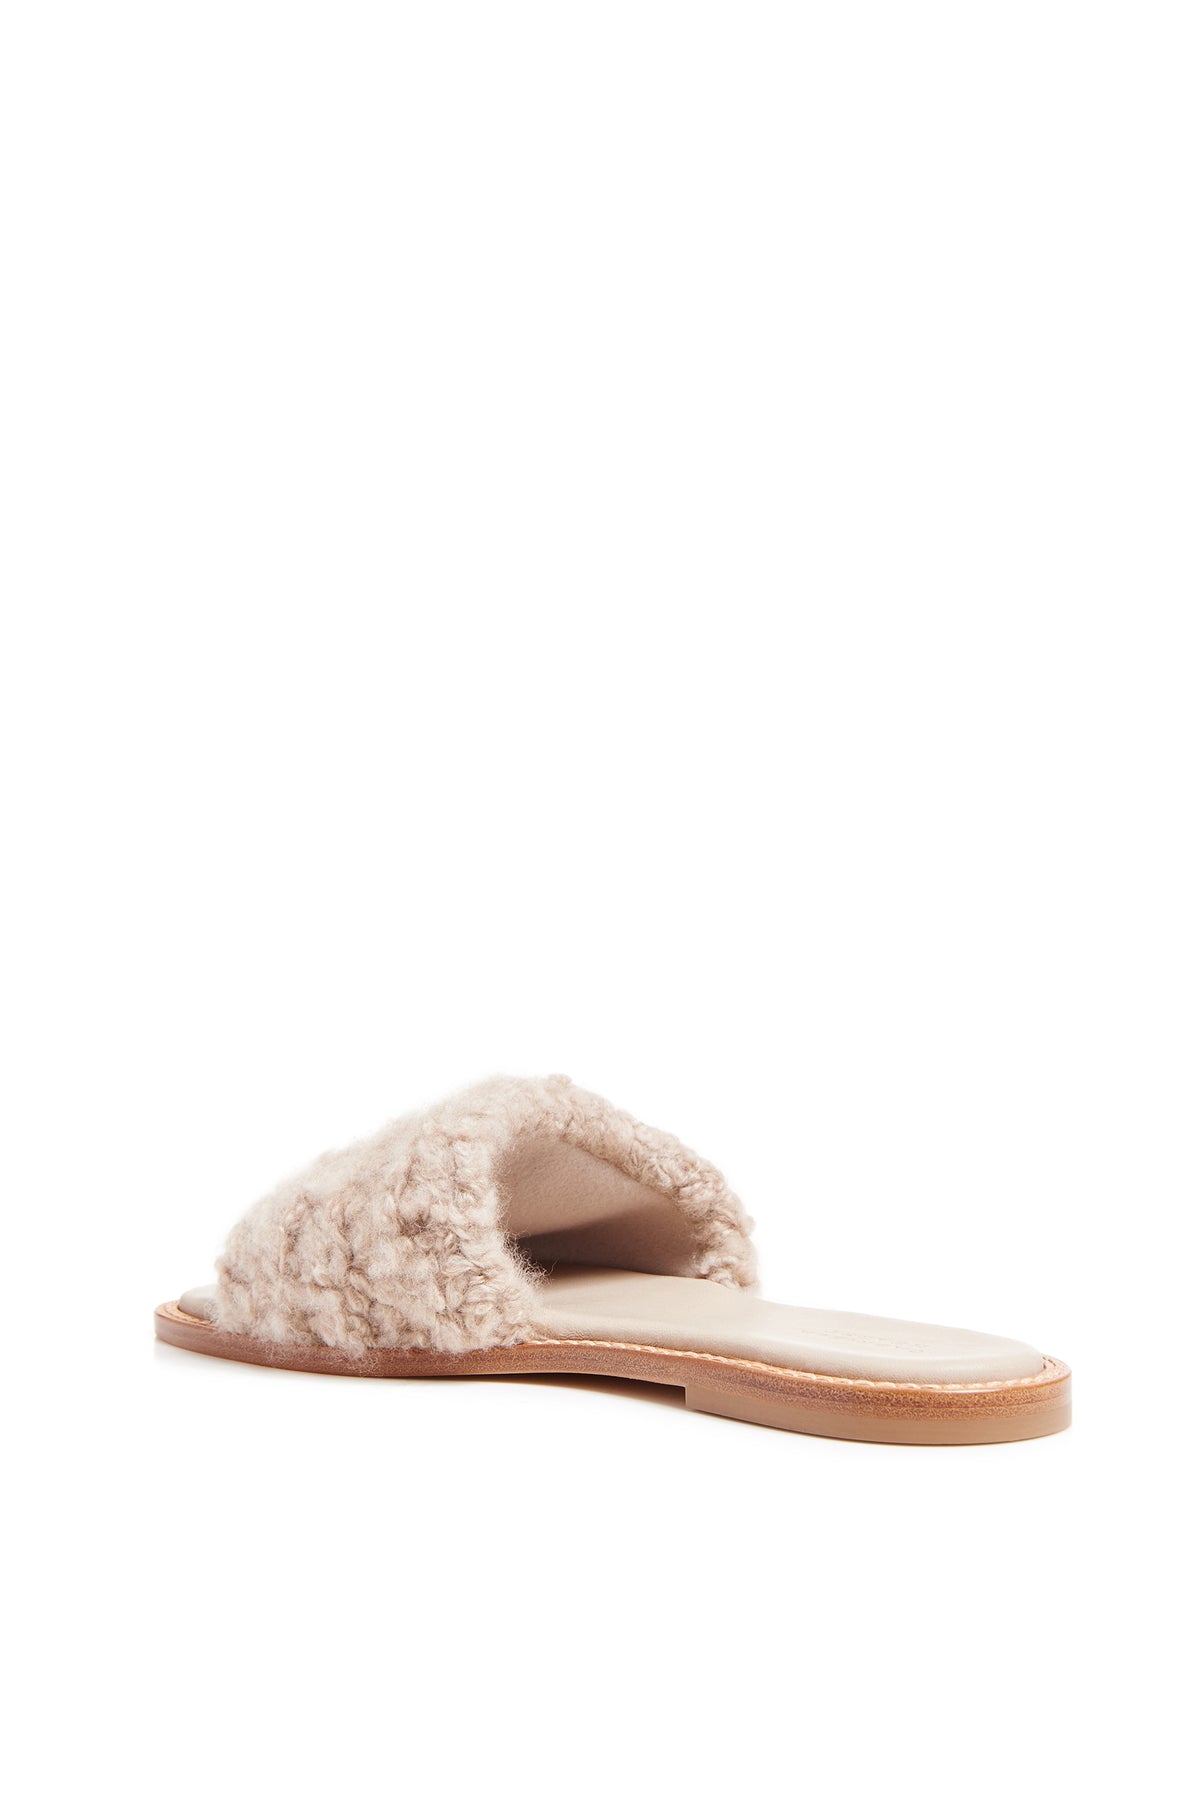 Ballast Slide in Oatmeal Leather & Cashmere